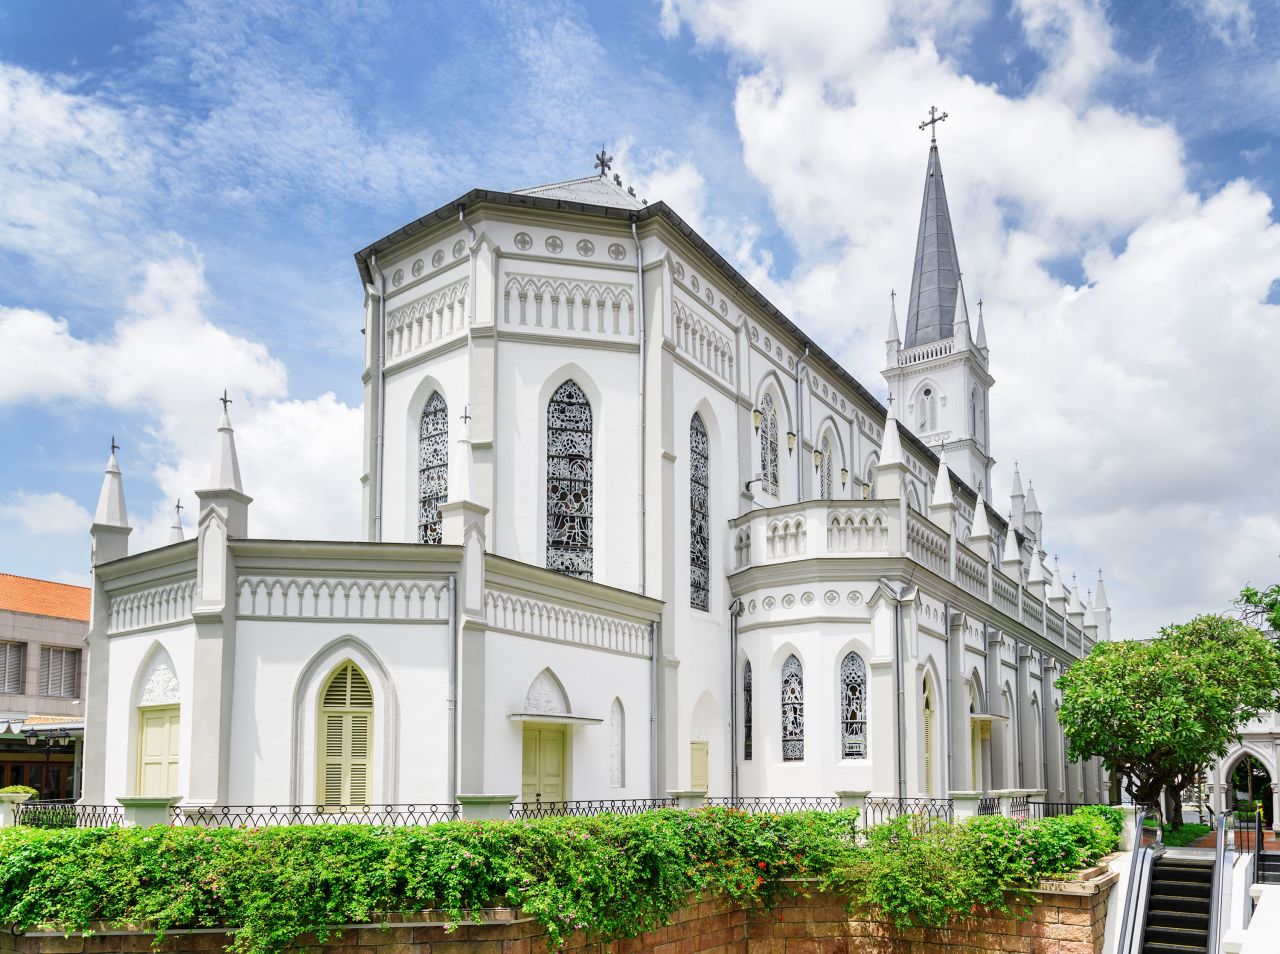 CHIJMES has gone from religious to secular uses.